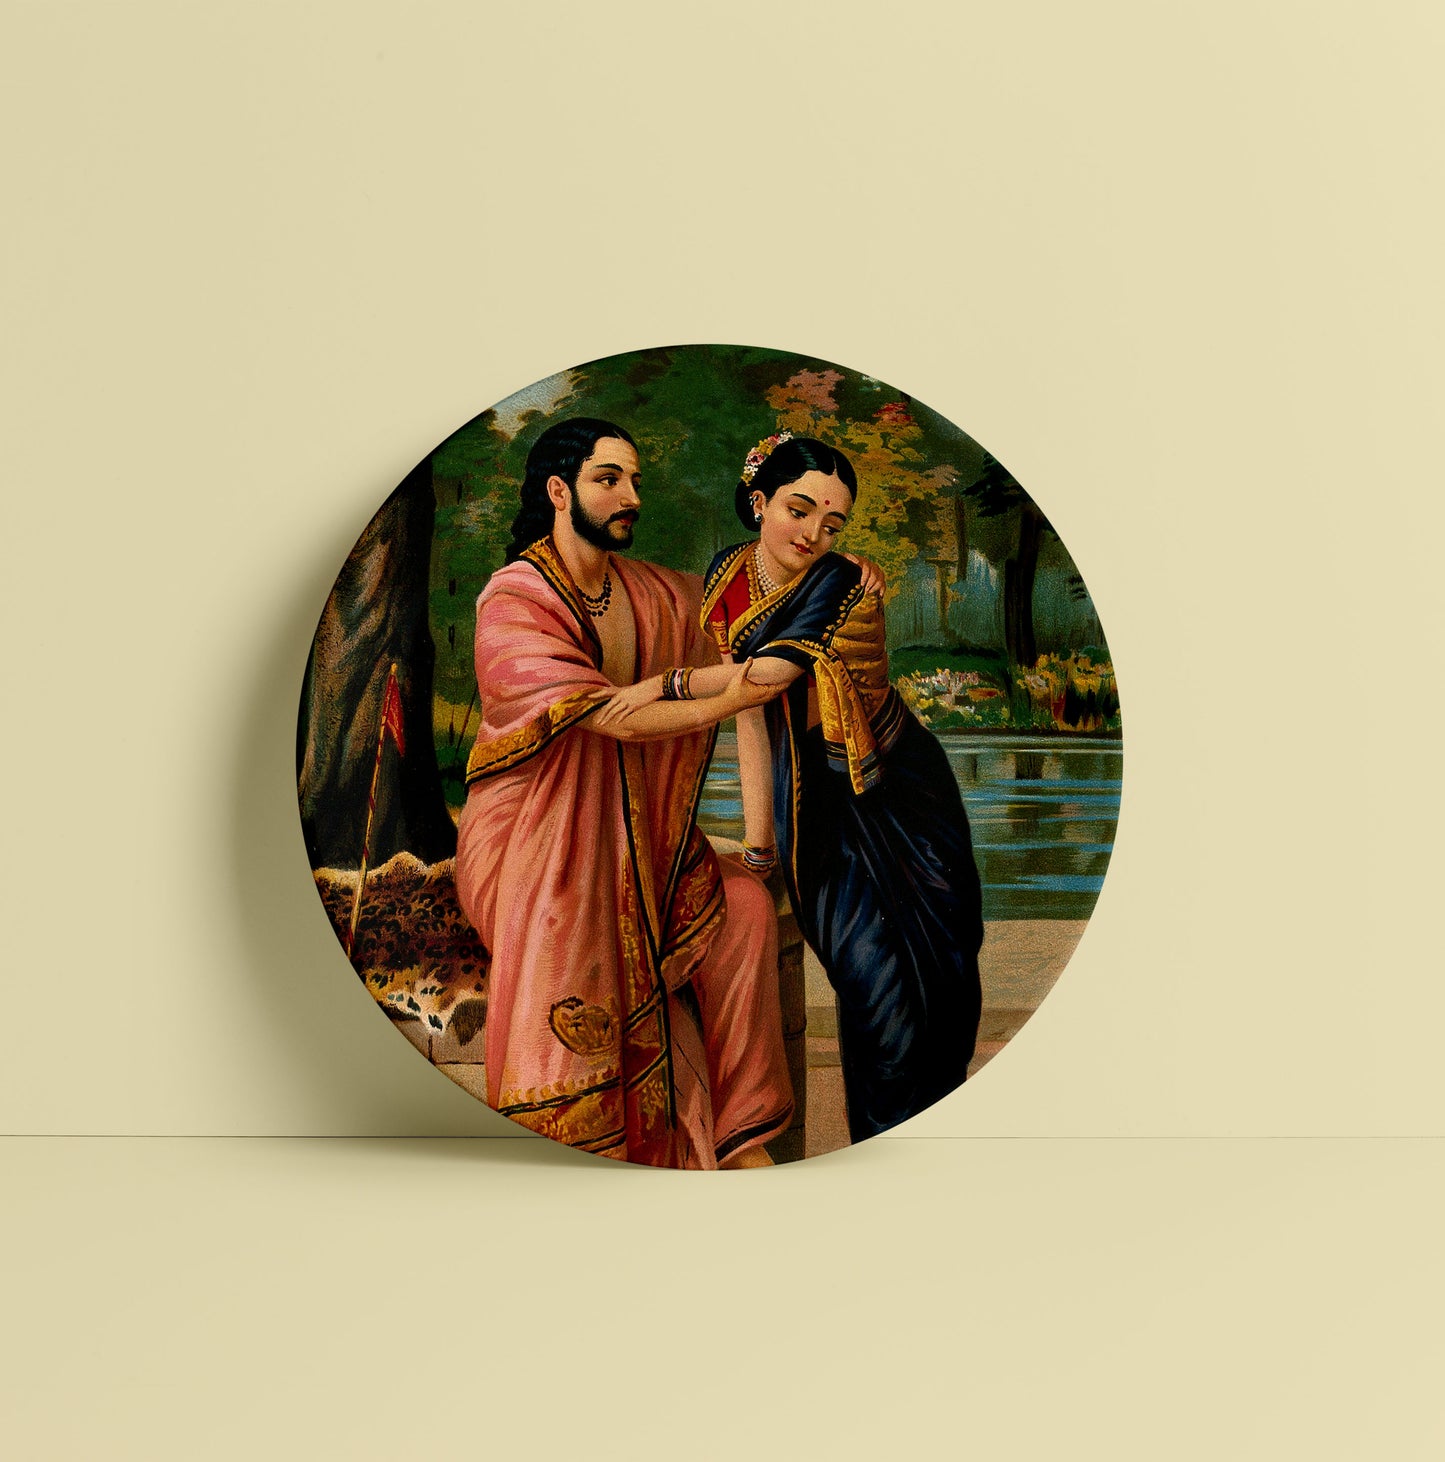 Arjuna in disguise a dancing teacher wooing Subhadra by Ravi Varma Ceramic Plate for Home Decor